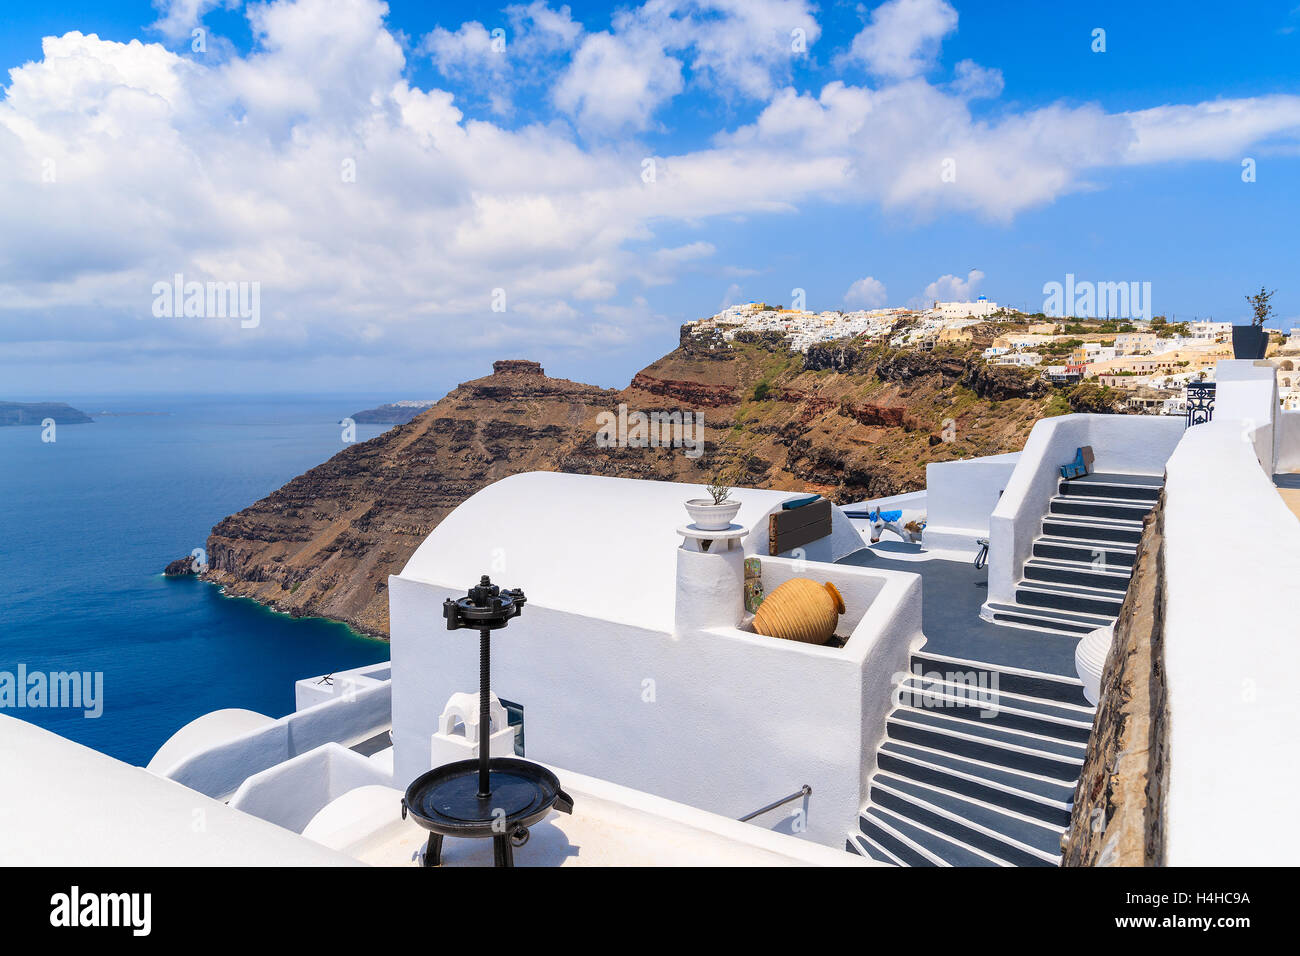 Footpath in Firostefani village with many typical white houses built on cliff side, Santorini island, Greece Stock Photo